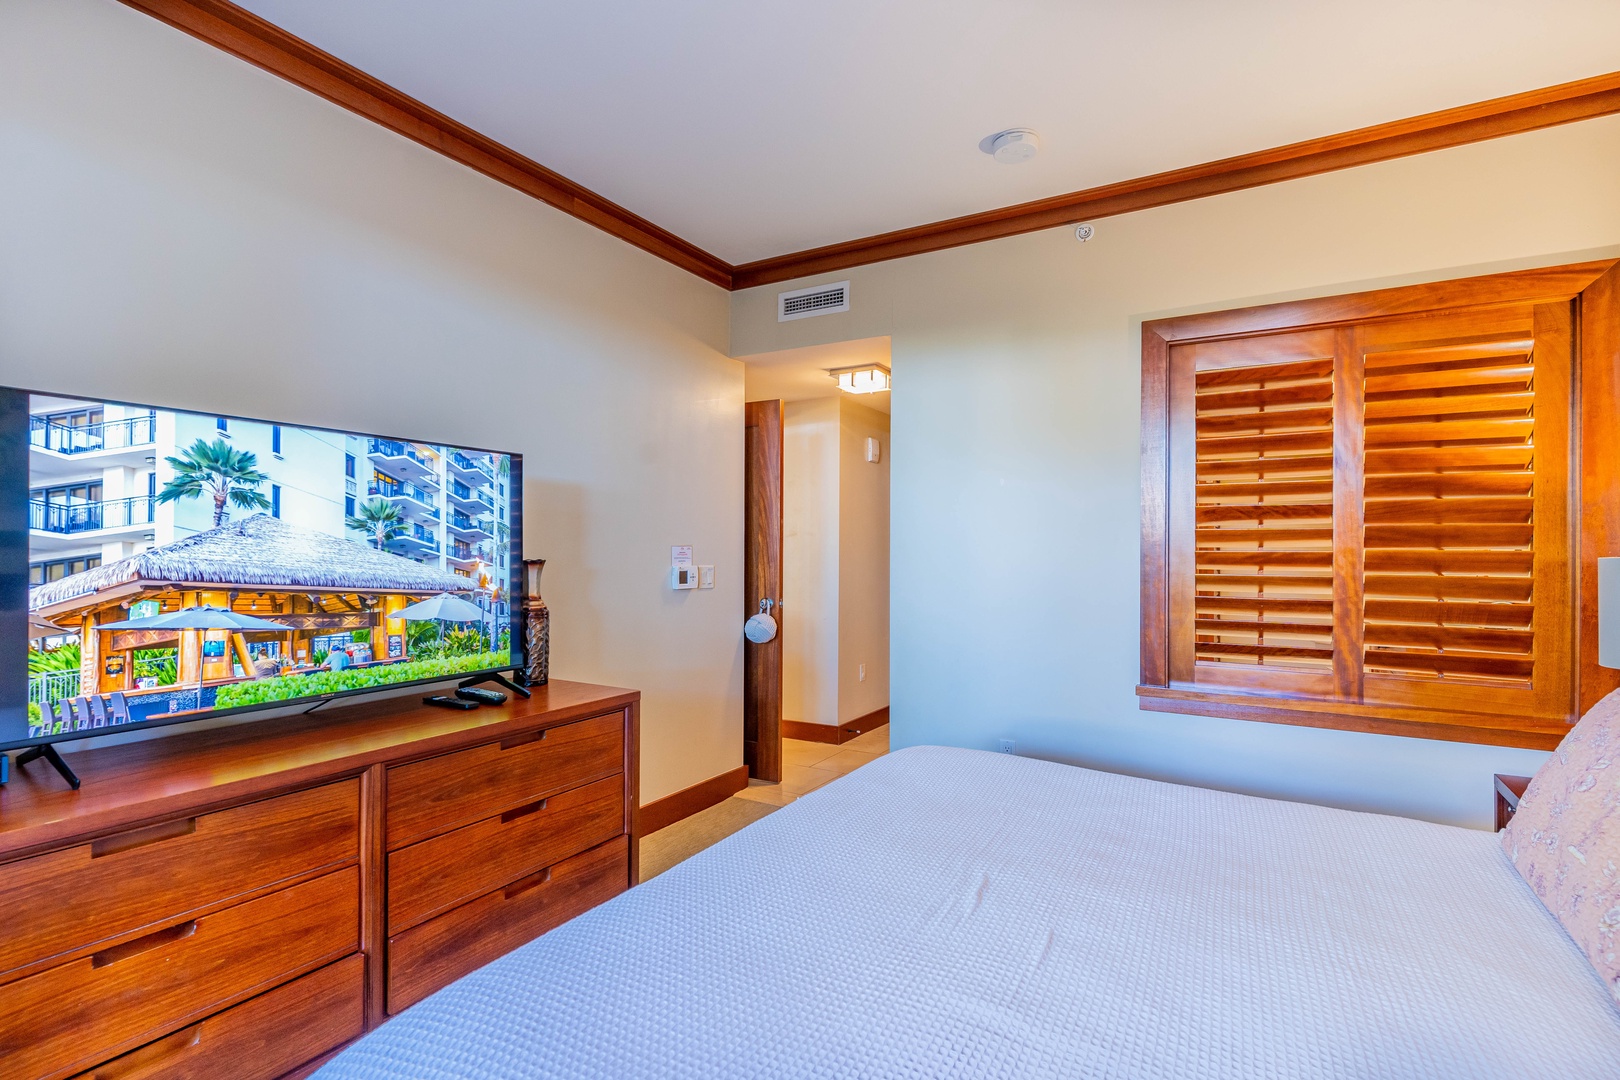 Kapolei Vacation Rentals, Ko Olina Beach Villas B102 - The primary guest bedroom has luxury linens and a spacious dresser.